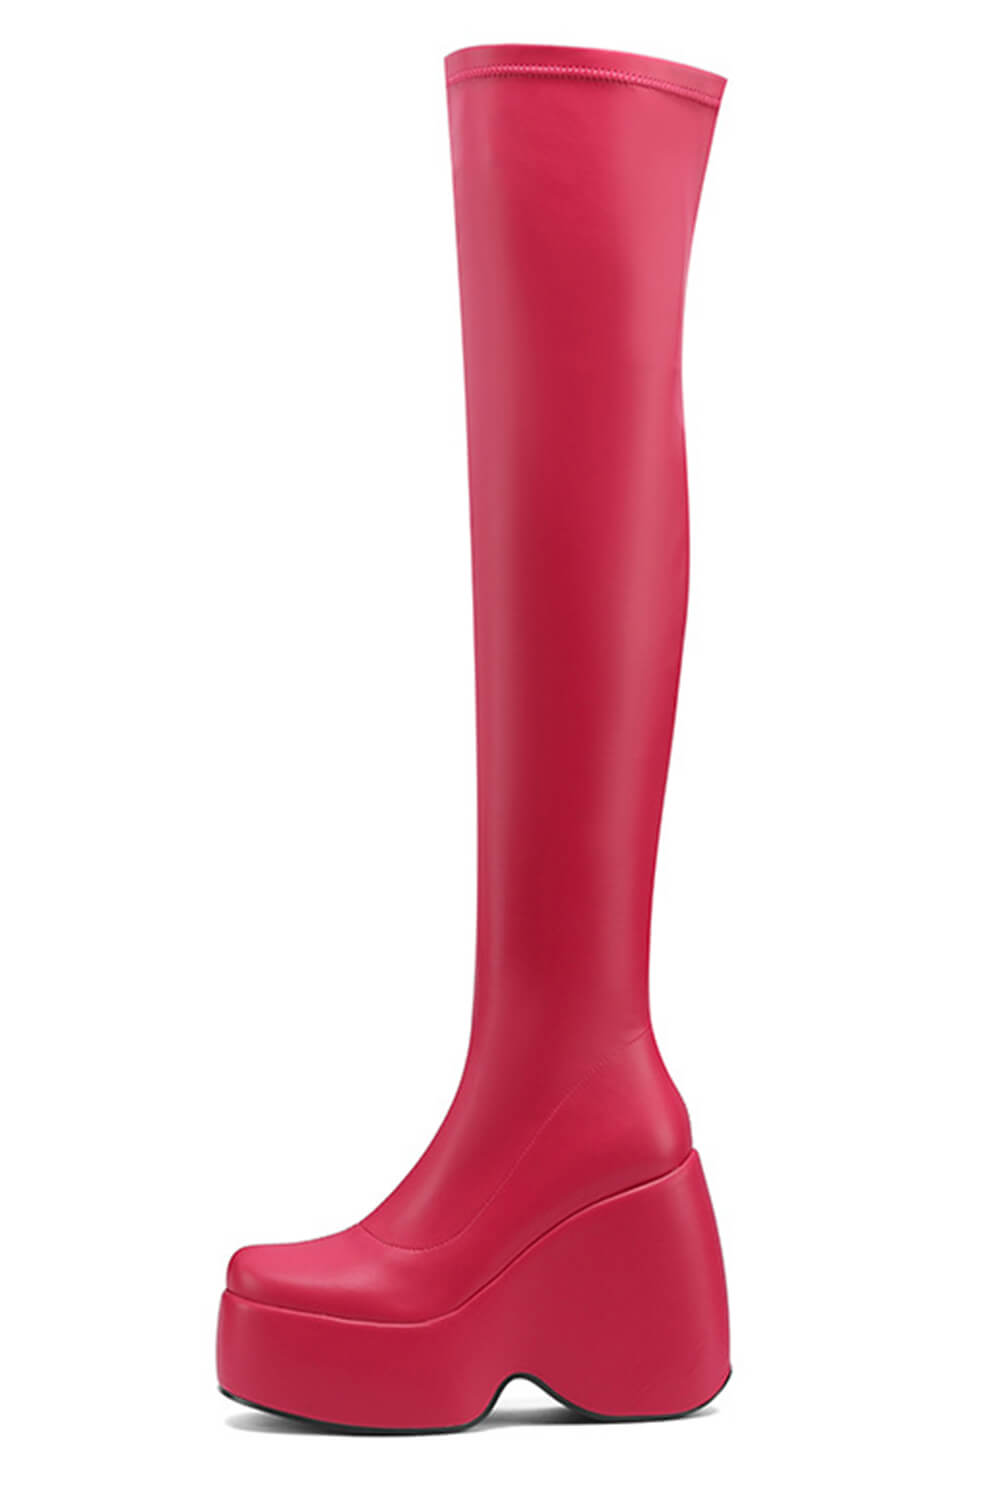 Zip Detail Chunky Platform Wedge Over The Knee Thigh High Long Bike Boot - Rose